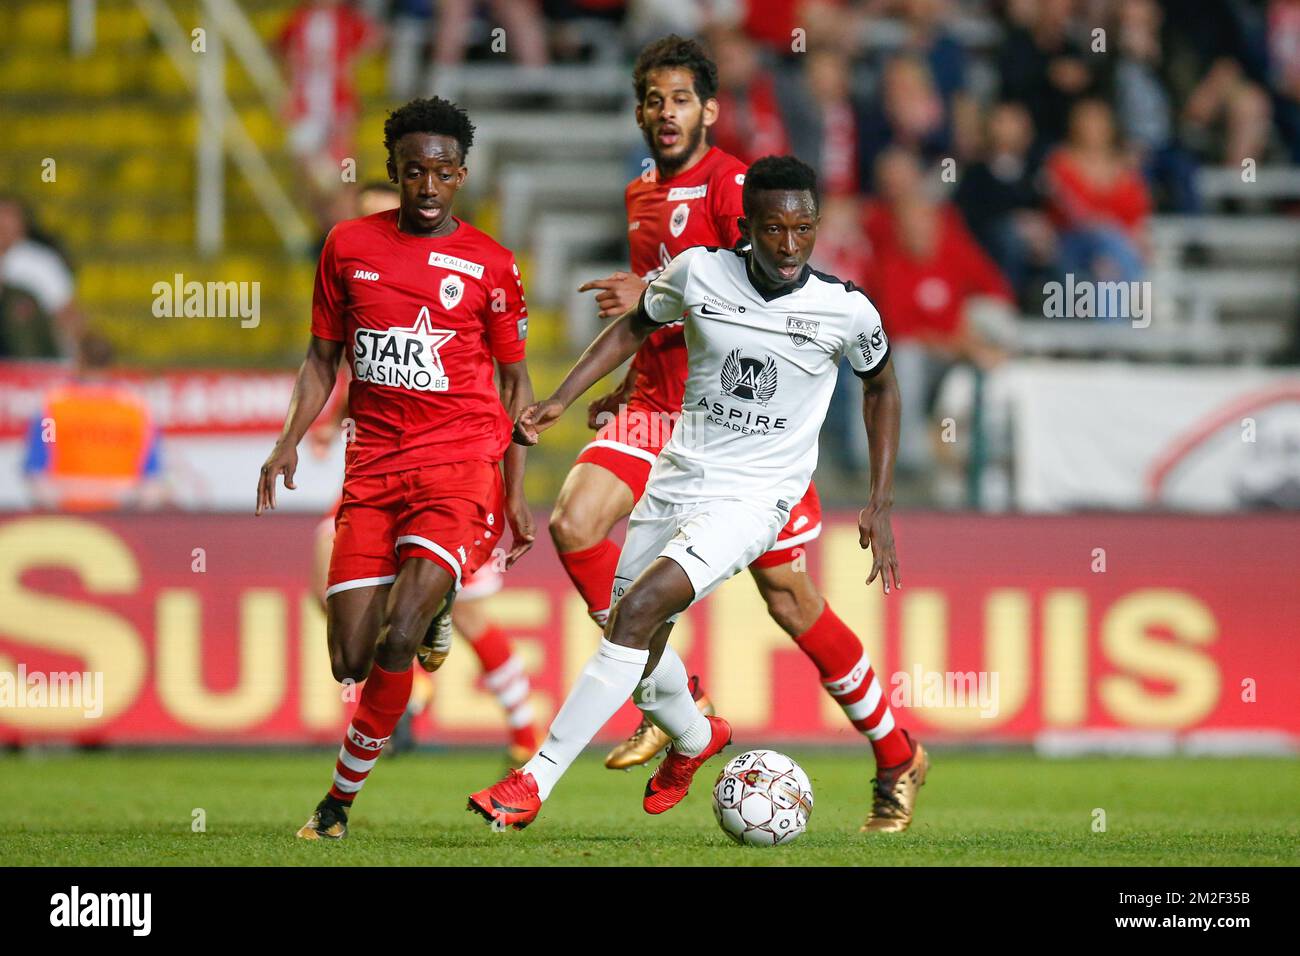 Antwerp's Goune Niangadou and Eupen's Lazare Amani fight for the ball  during the Jupiler Pro League match between Royal Antwerp FC and KAS Eupen,  in Antwerp, Wednesday 09 May 2018, on day